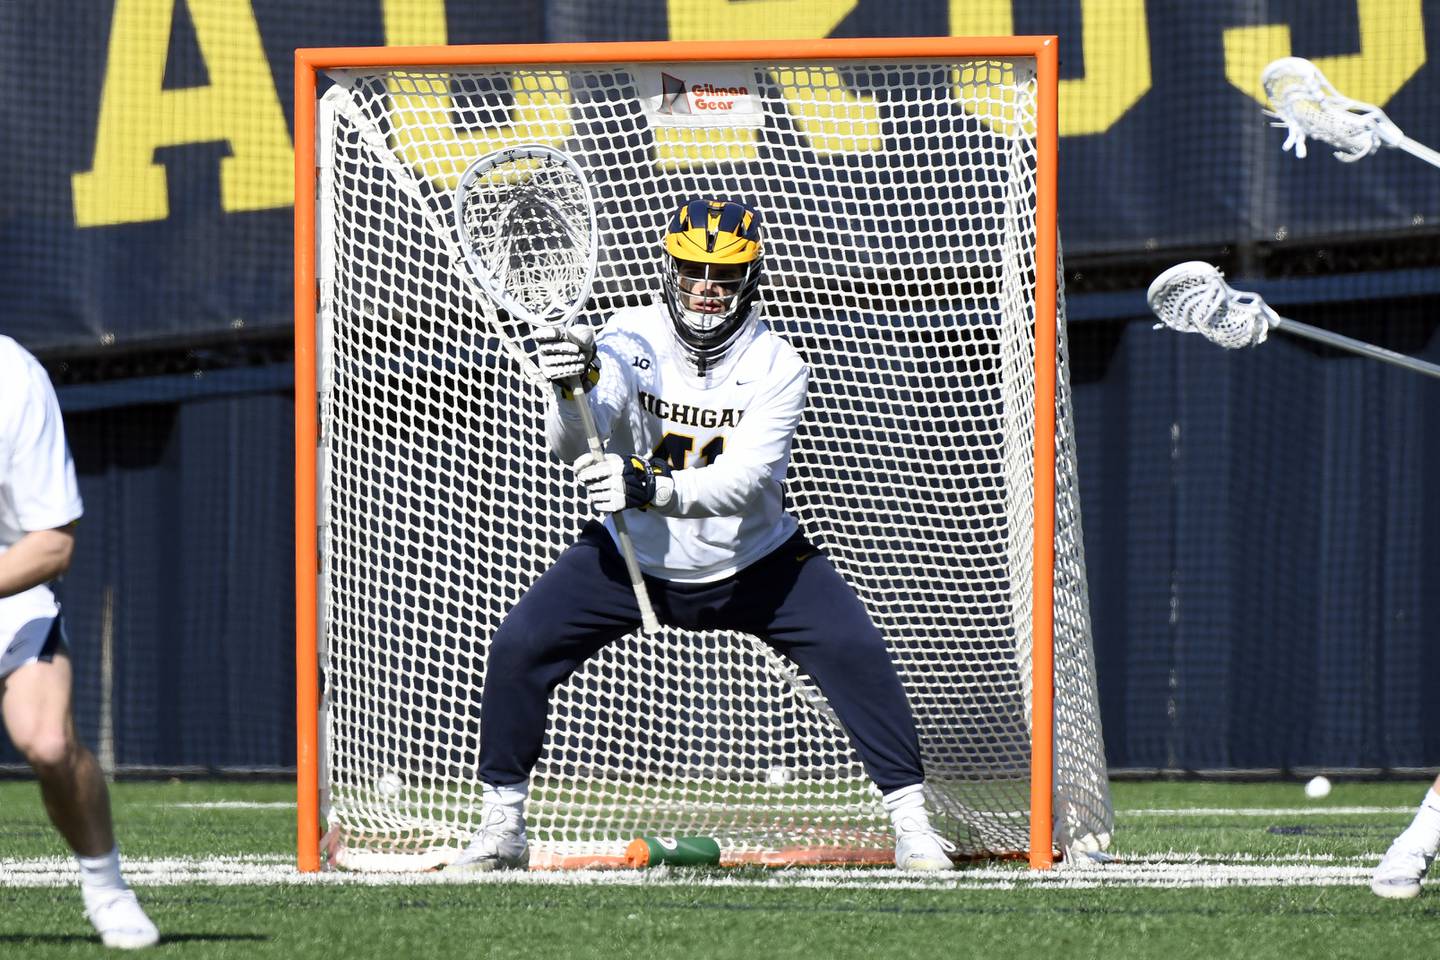 Shane Carr, a Saverna Park grad who now plays for the University of Michigan men's lacrosse team competes against Hofstra at U-M Lacrosse Stadium, Saturday, February 18, 2023, in Ann Arbor, Michigan.